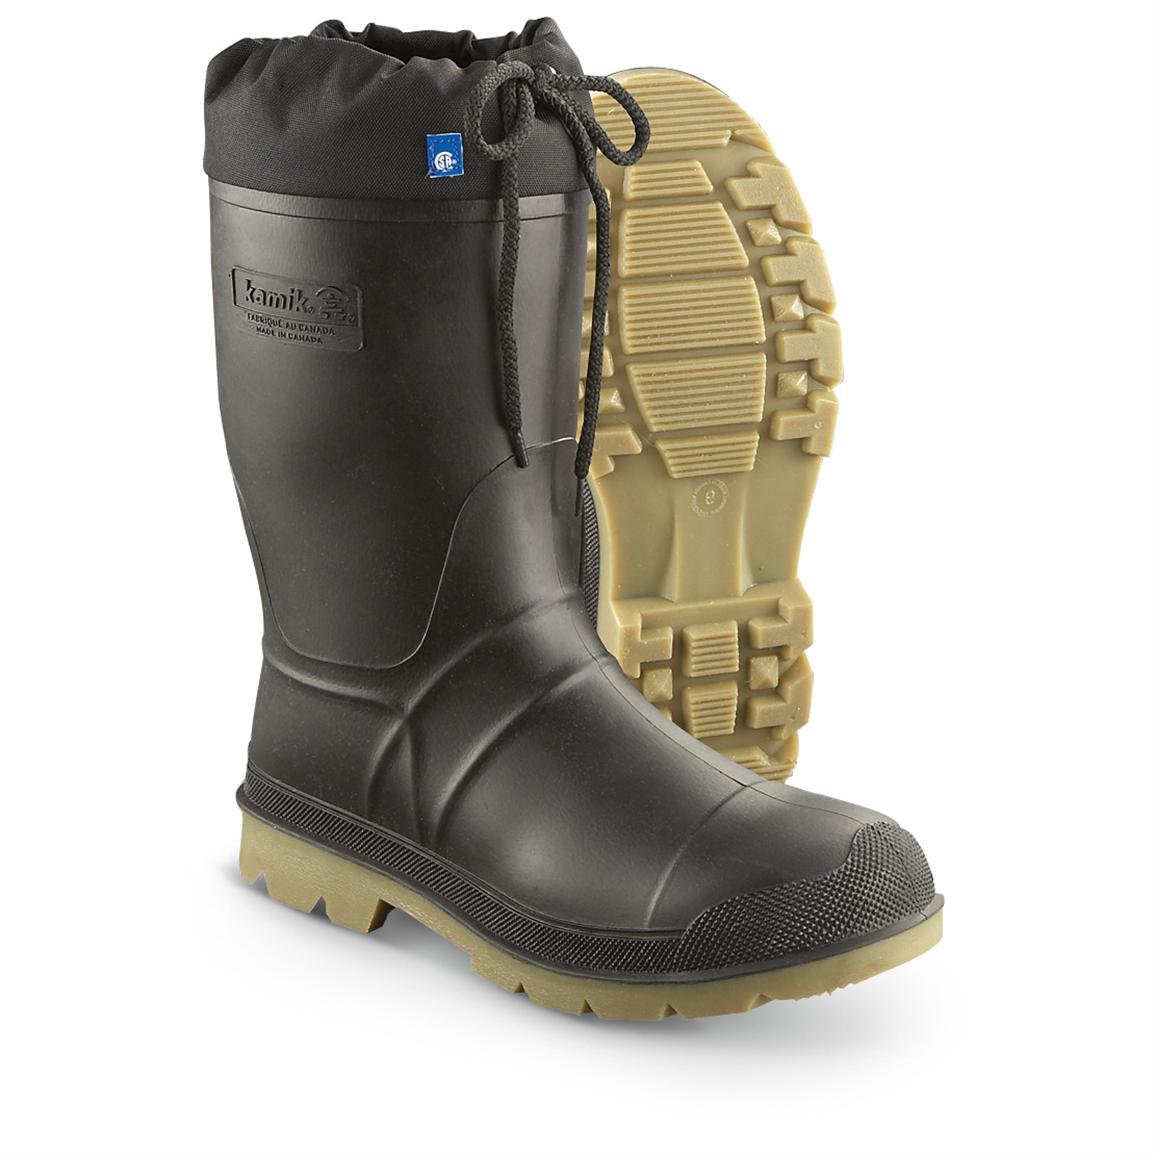 Workday 2 Steel Toe Rubber Boots, Black 